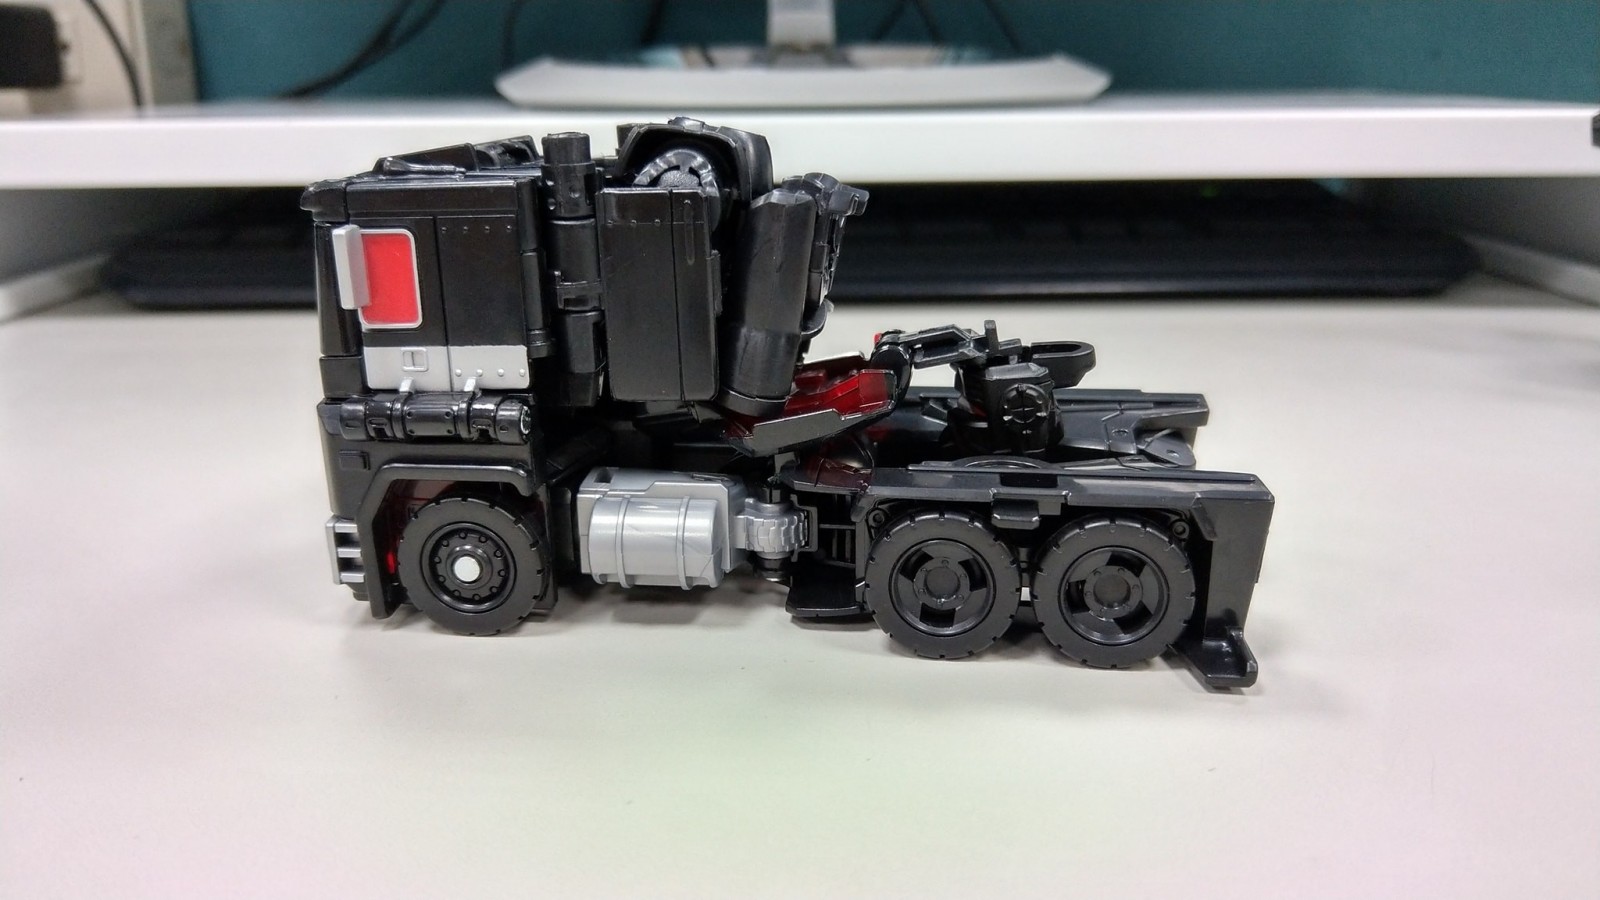 Transformers News: In Hand Images of Transformers Power of the Primes Amazon Exclusive Nemesis Prime